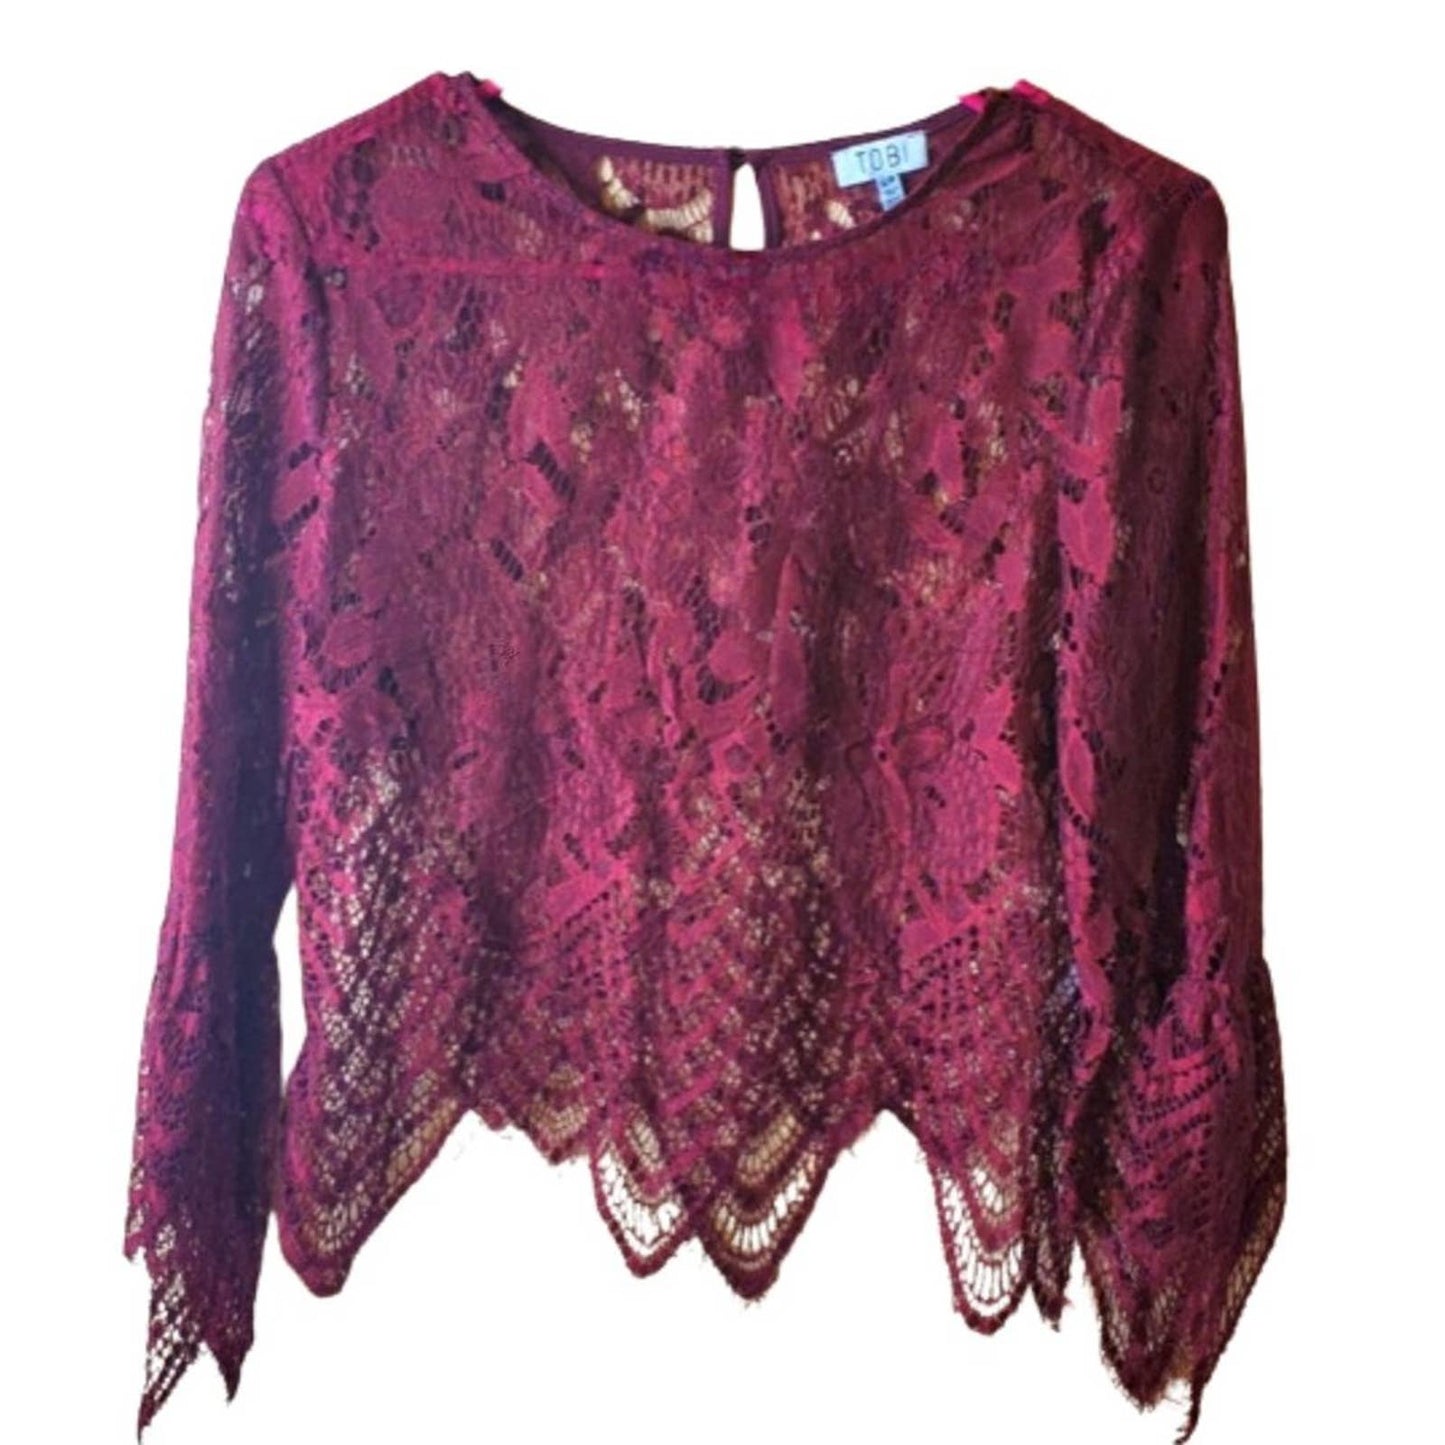 Tobi Wine Lace Cropped Top Overlay Blouse SIze Small